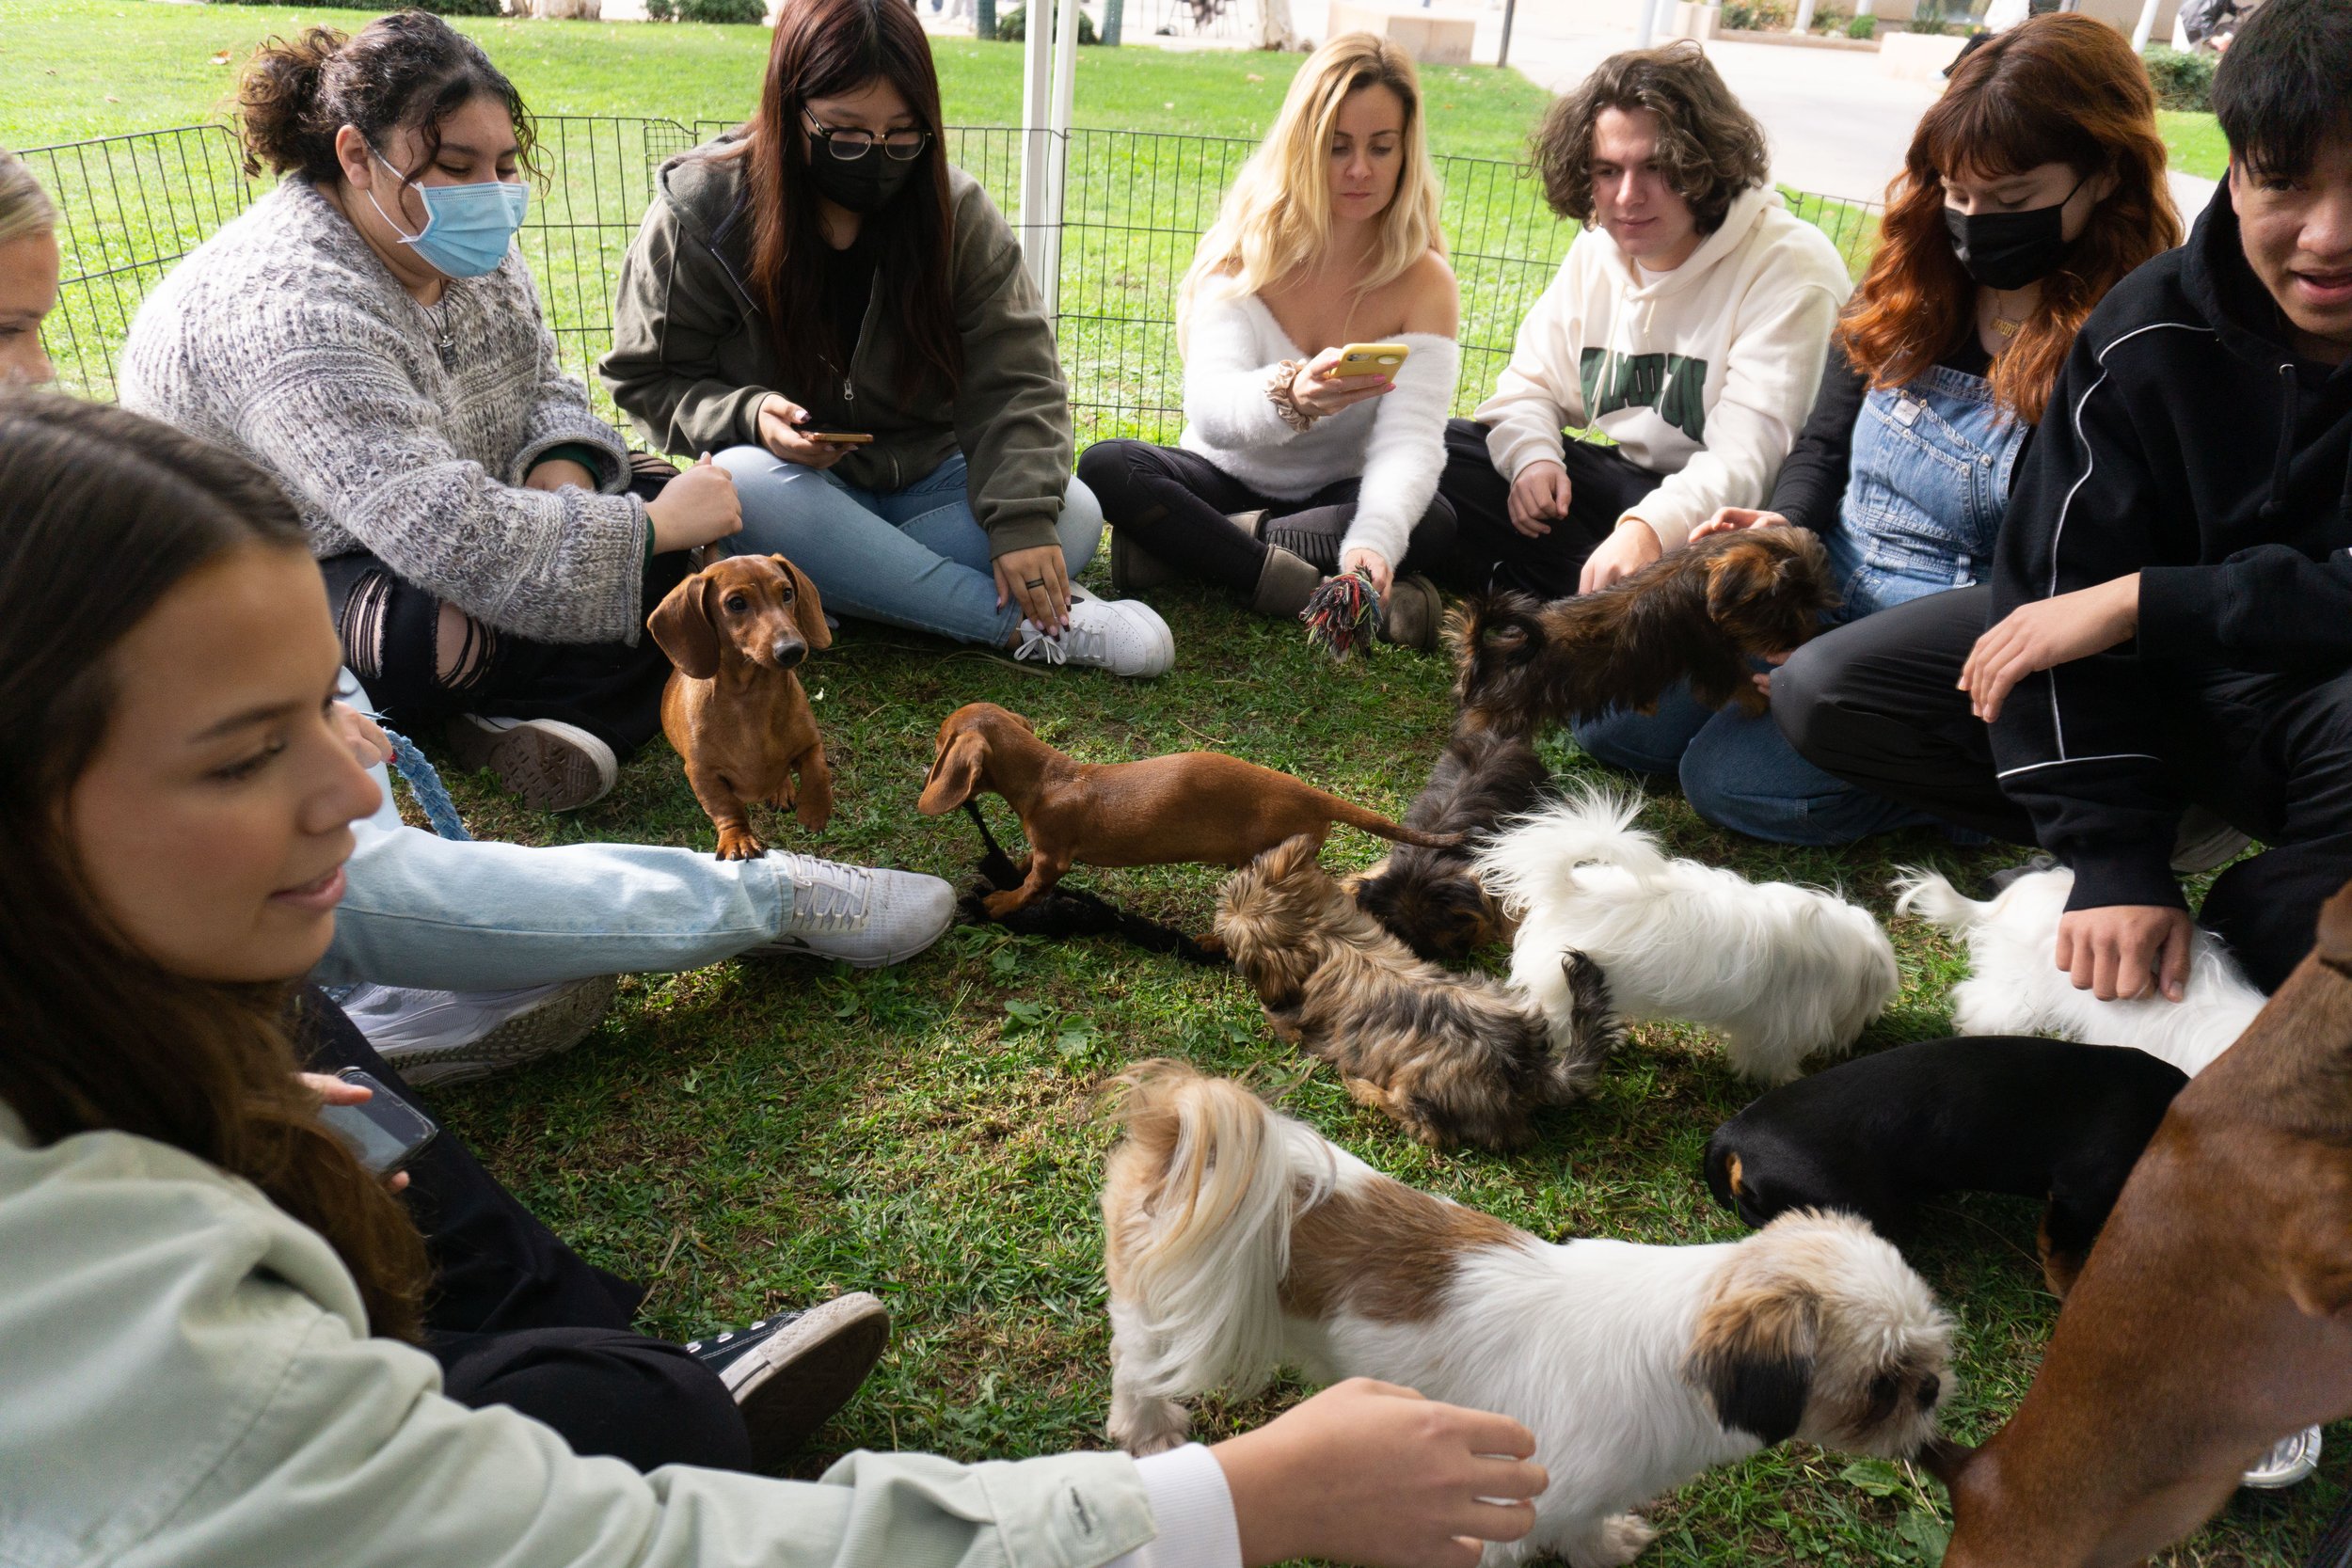  Students petting puppies at the "Pre Finals Chill Out" at Santa Monica college main campus  on Tuseday, December 6, 2022, in Santa Monica, Calif. The event is to relax students a week before finals begin (Daniel De Anda | The Corsair 